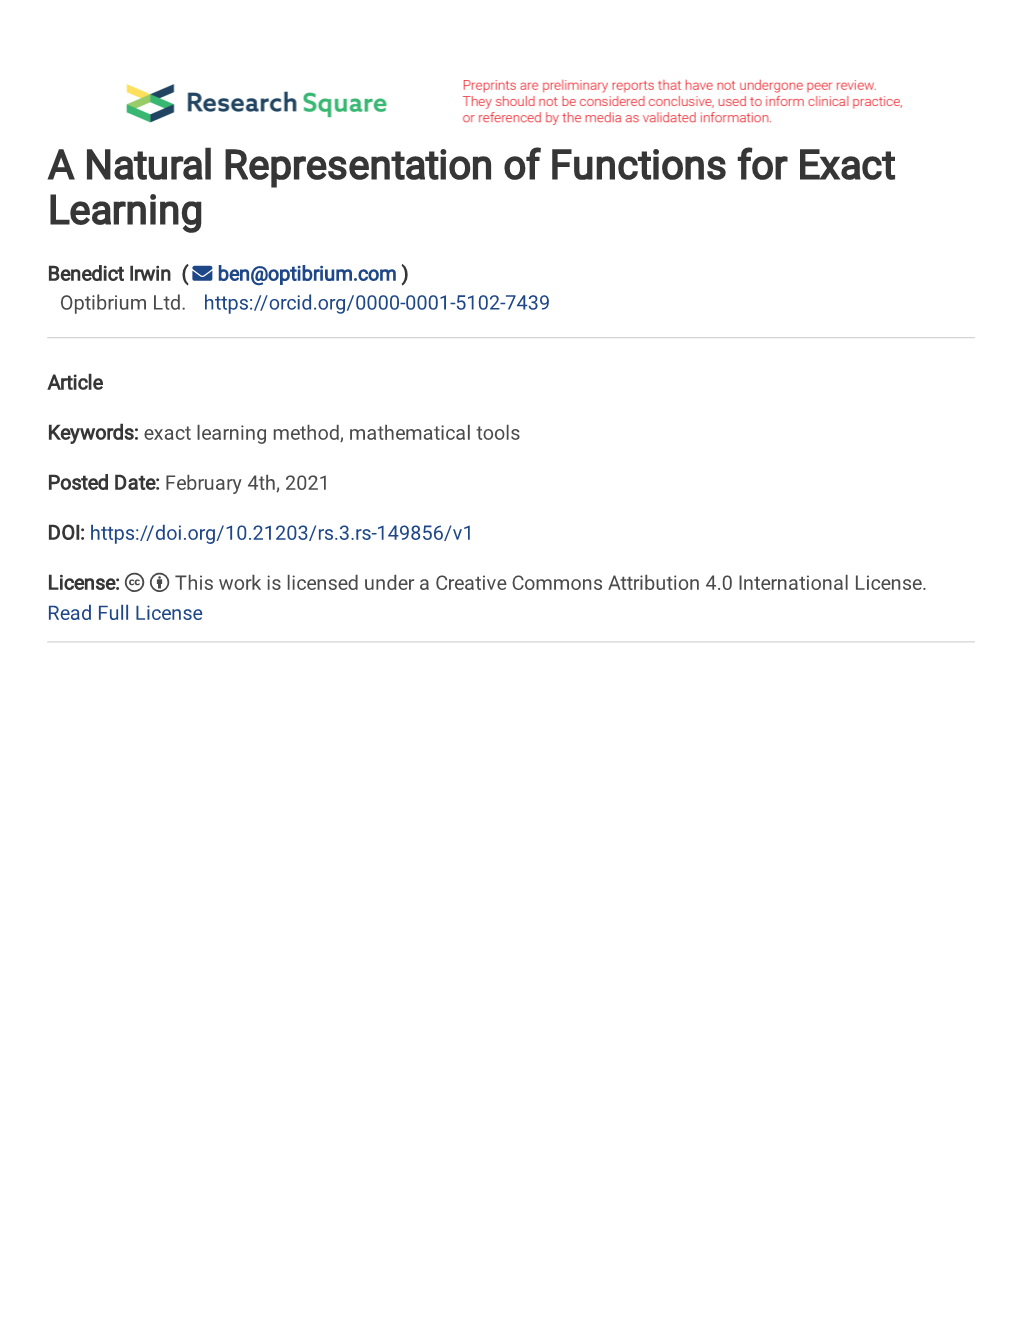 A Natural Representation of Functions for Exact Learning